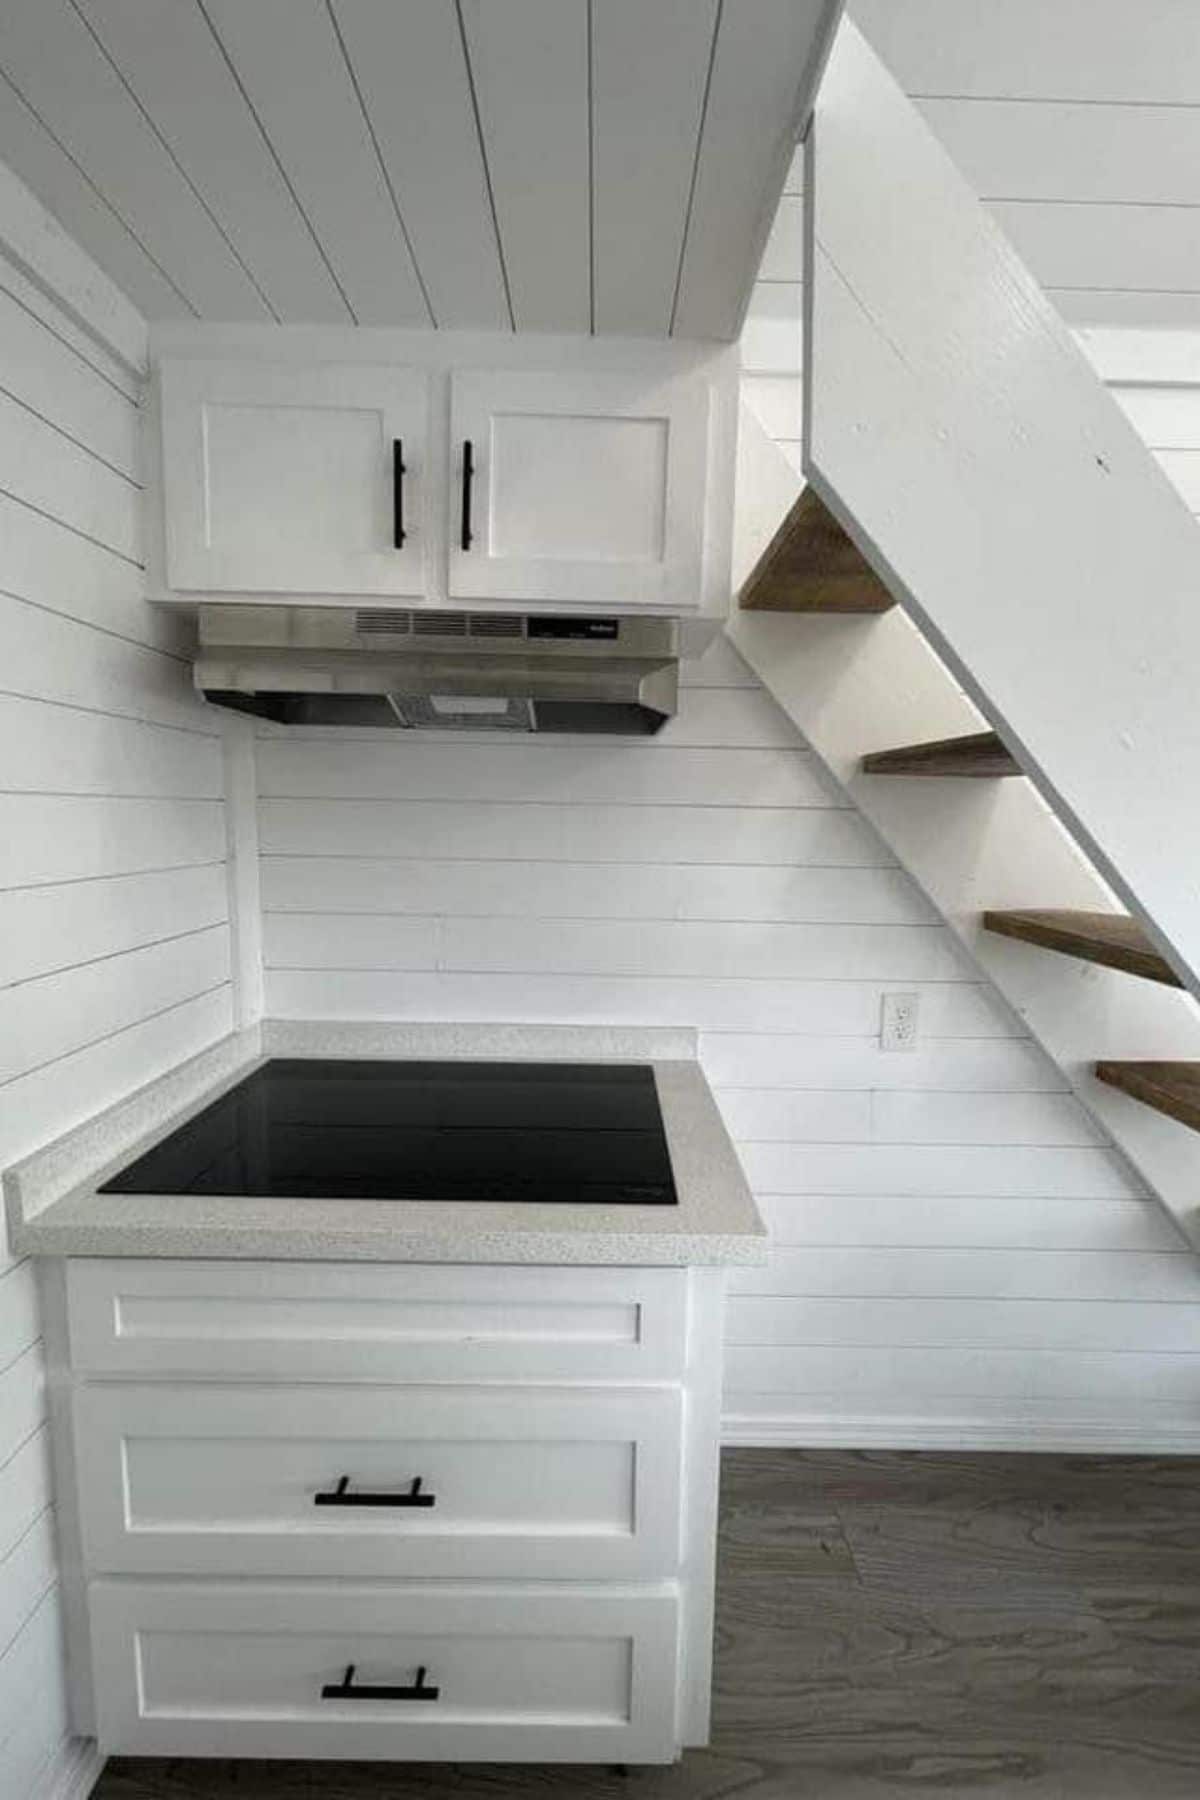 Cooktop in white cabinets under stairs to loft